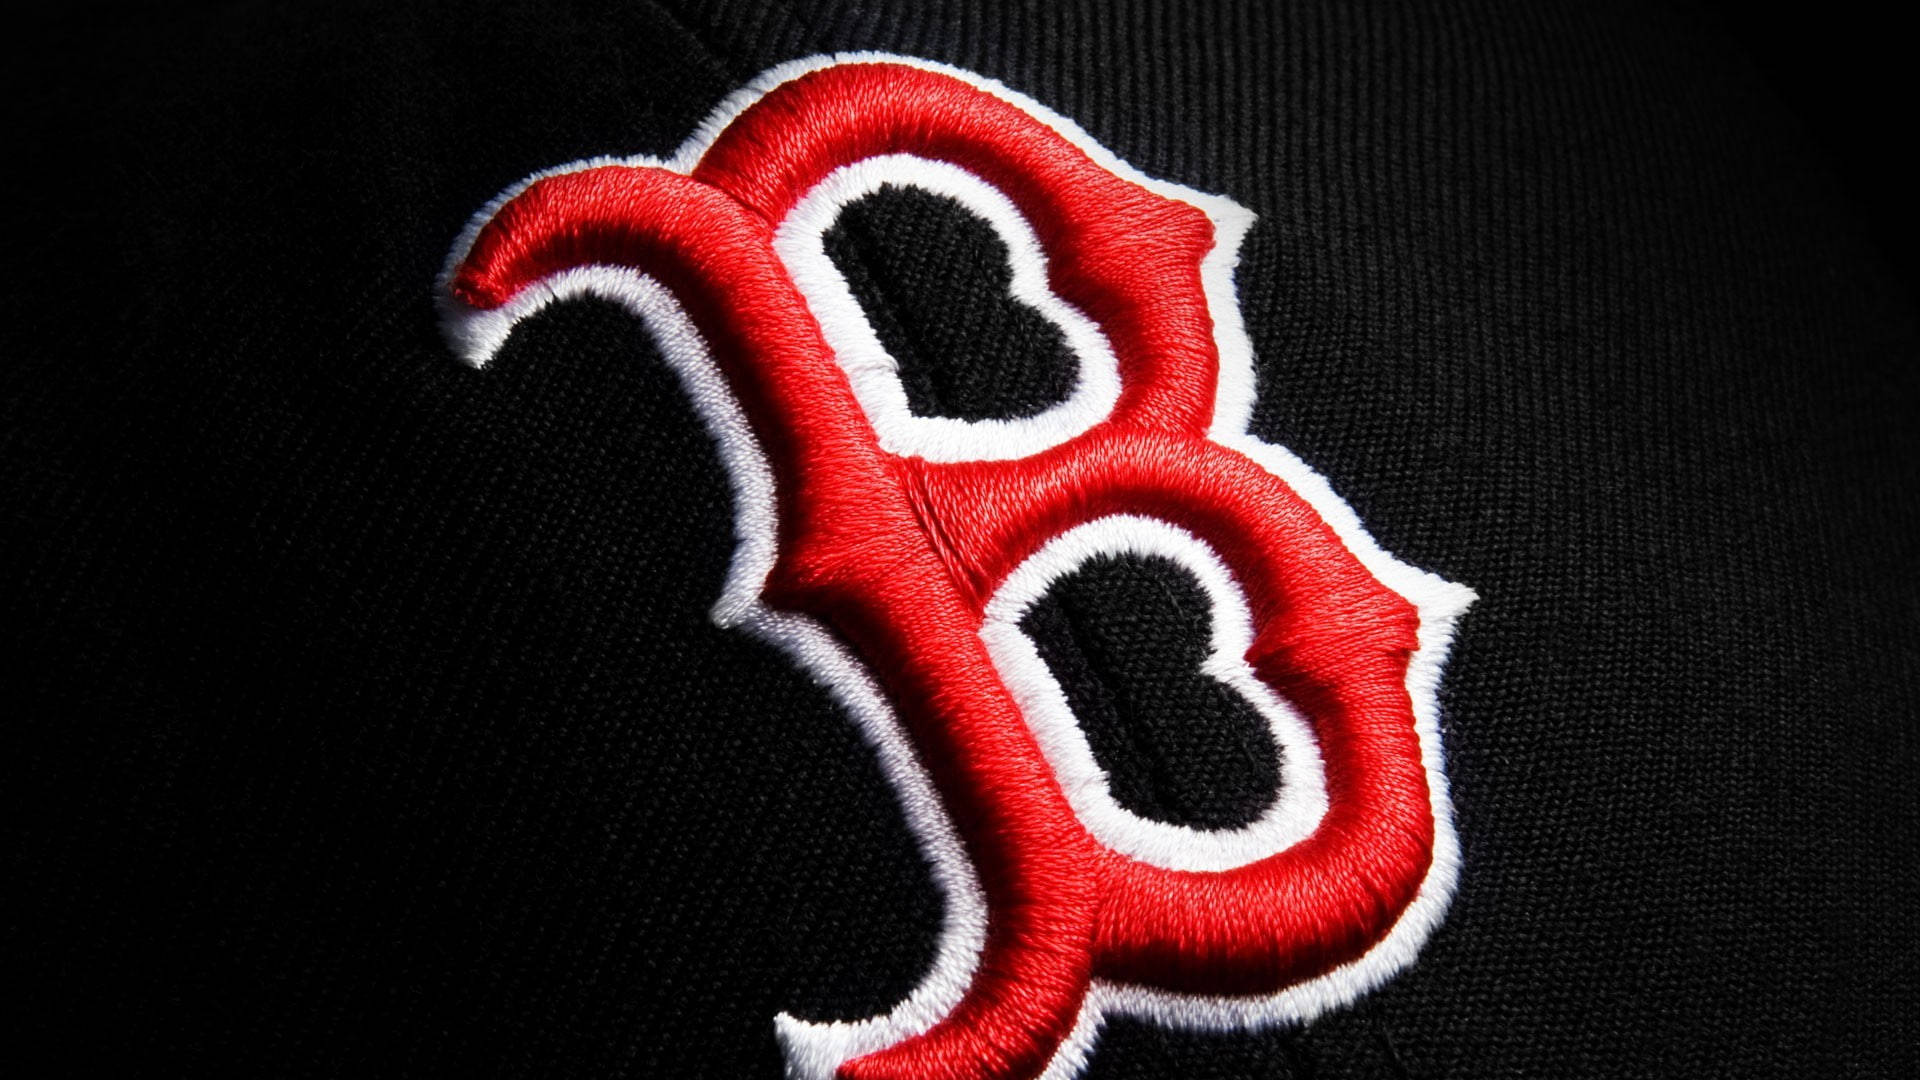 Boston Red Sox B Embroidery Wallpaper